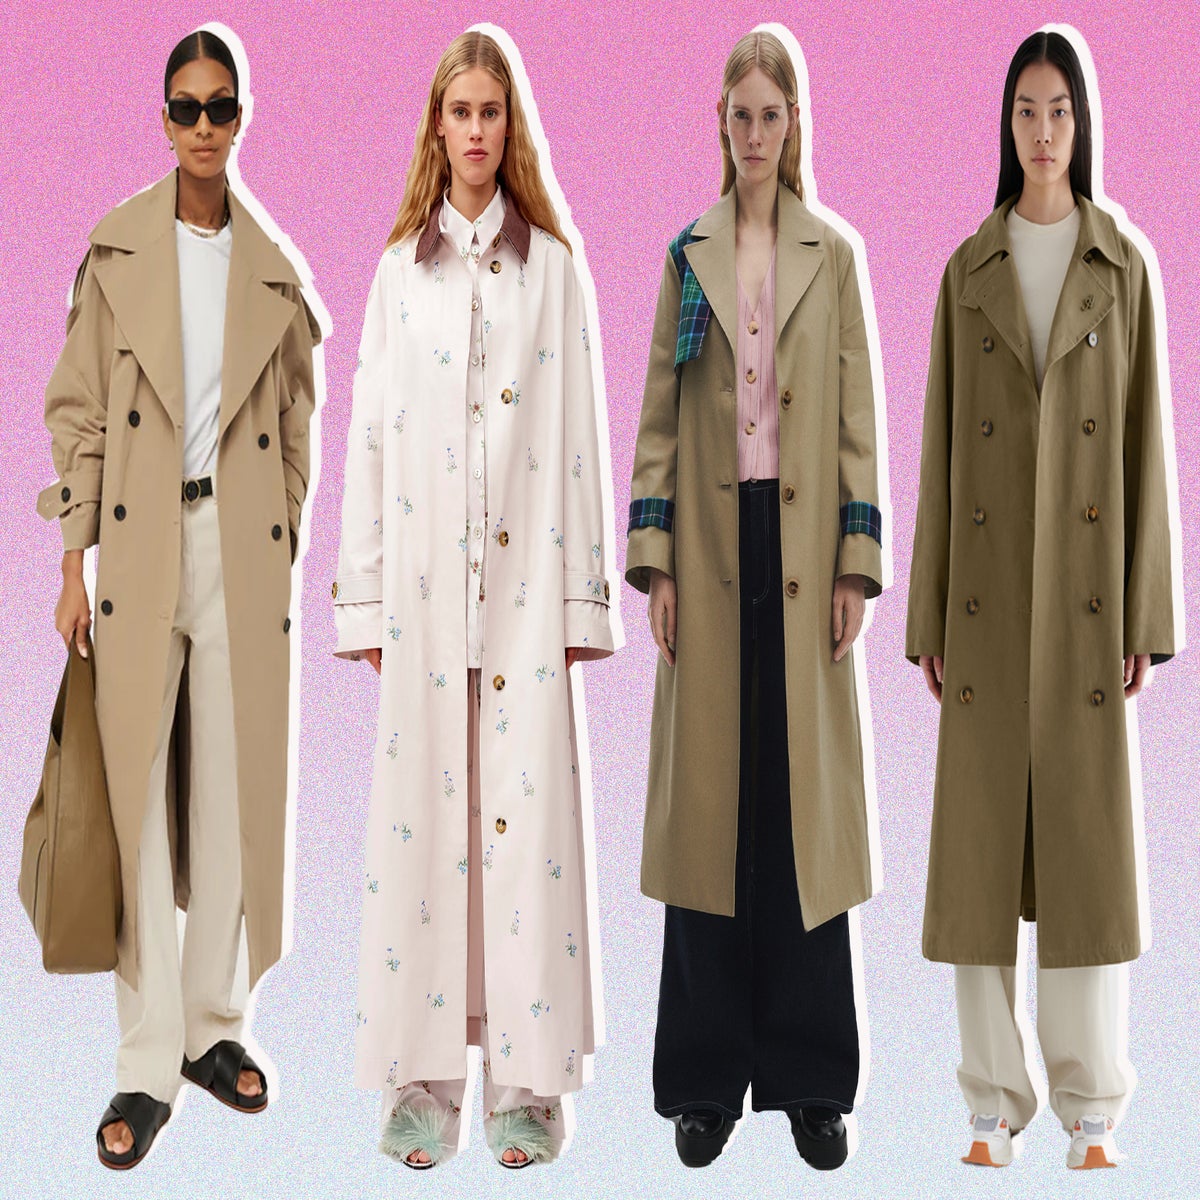 12 Trench Coat Outfits You'll Want to Bookmark